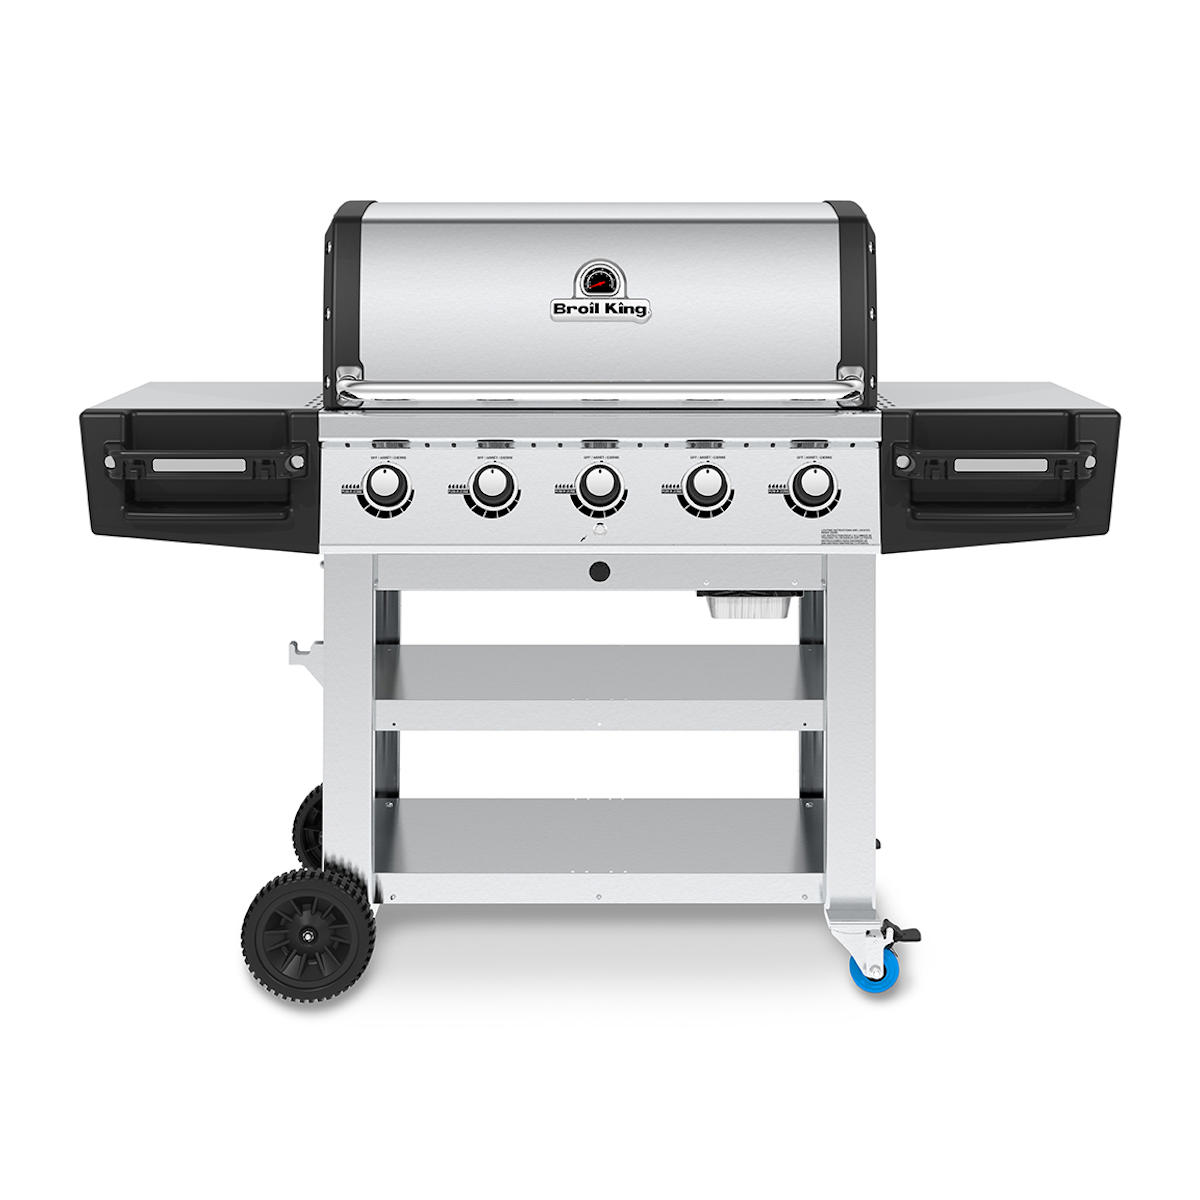 Broil King Regal S520 Commercial